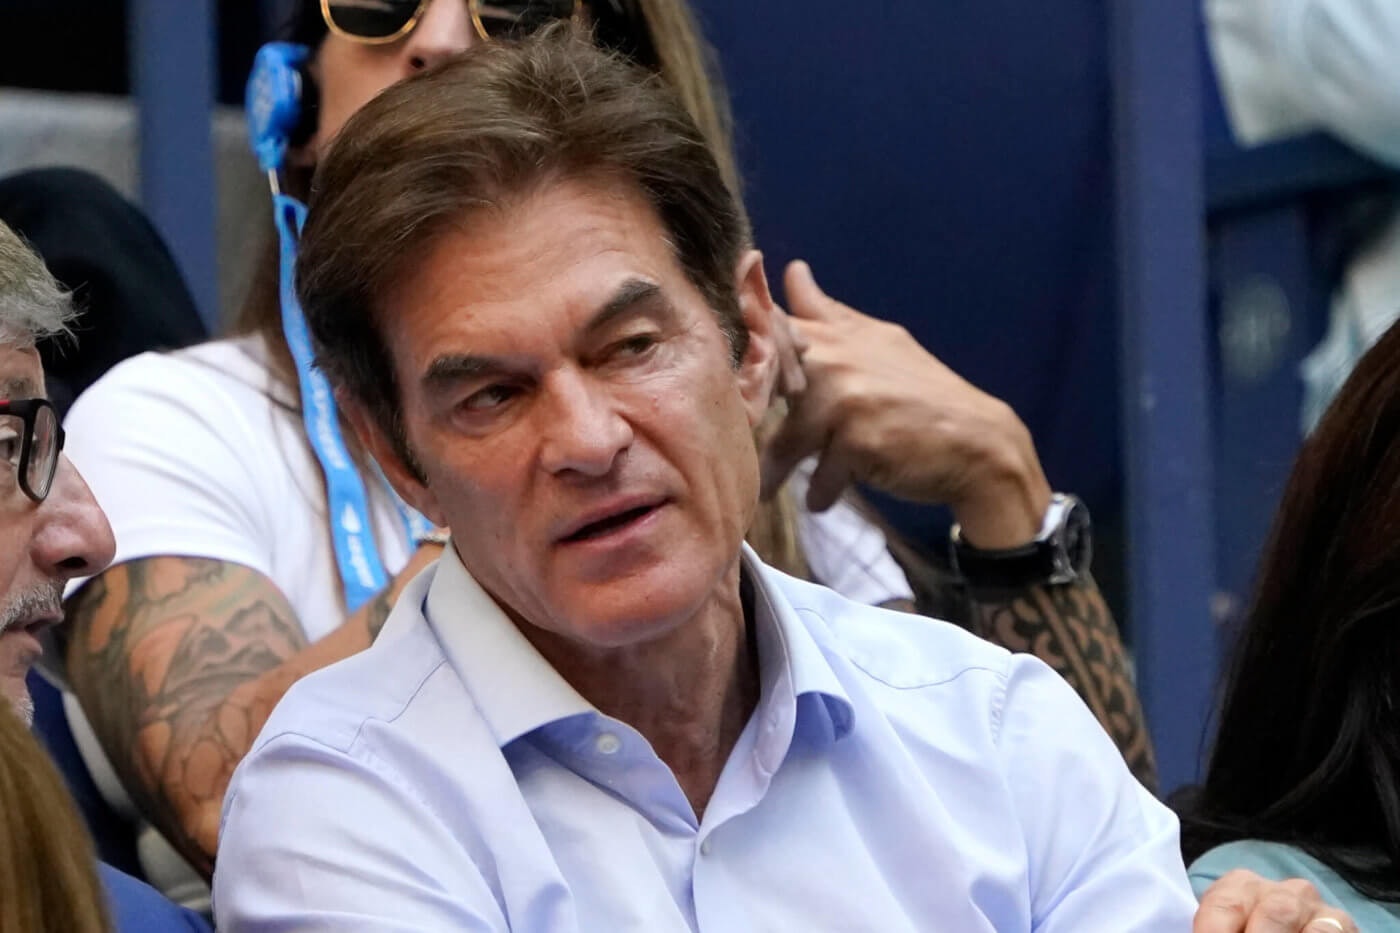 FILE—Dr. Oz watches play during the women's singles final of the US Open tennis championships, in this file photo from Sept. 11, 2021, in New York. Mehmet Oz is running in the wide-open race for the Pennsylvania seat being vacated by two-term Republican Sen. Pat Toomey. The race has attracted wealthy and well-connected transplants, and homers.(AP Photo/Elise Amendola, File)